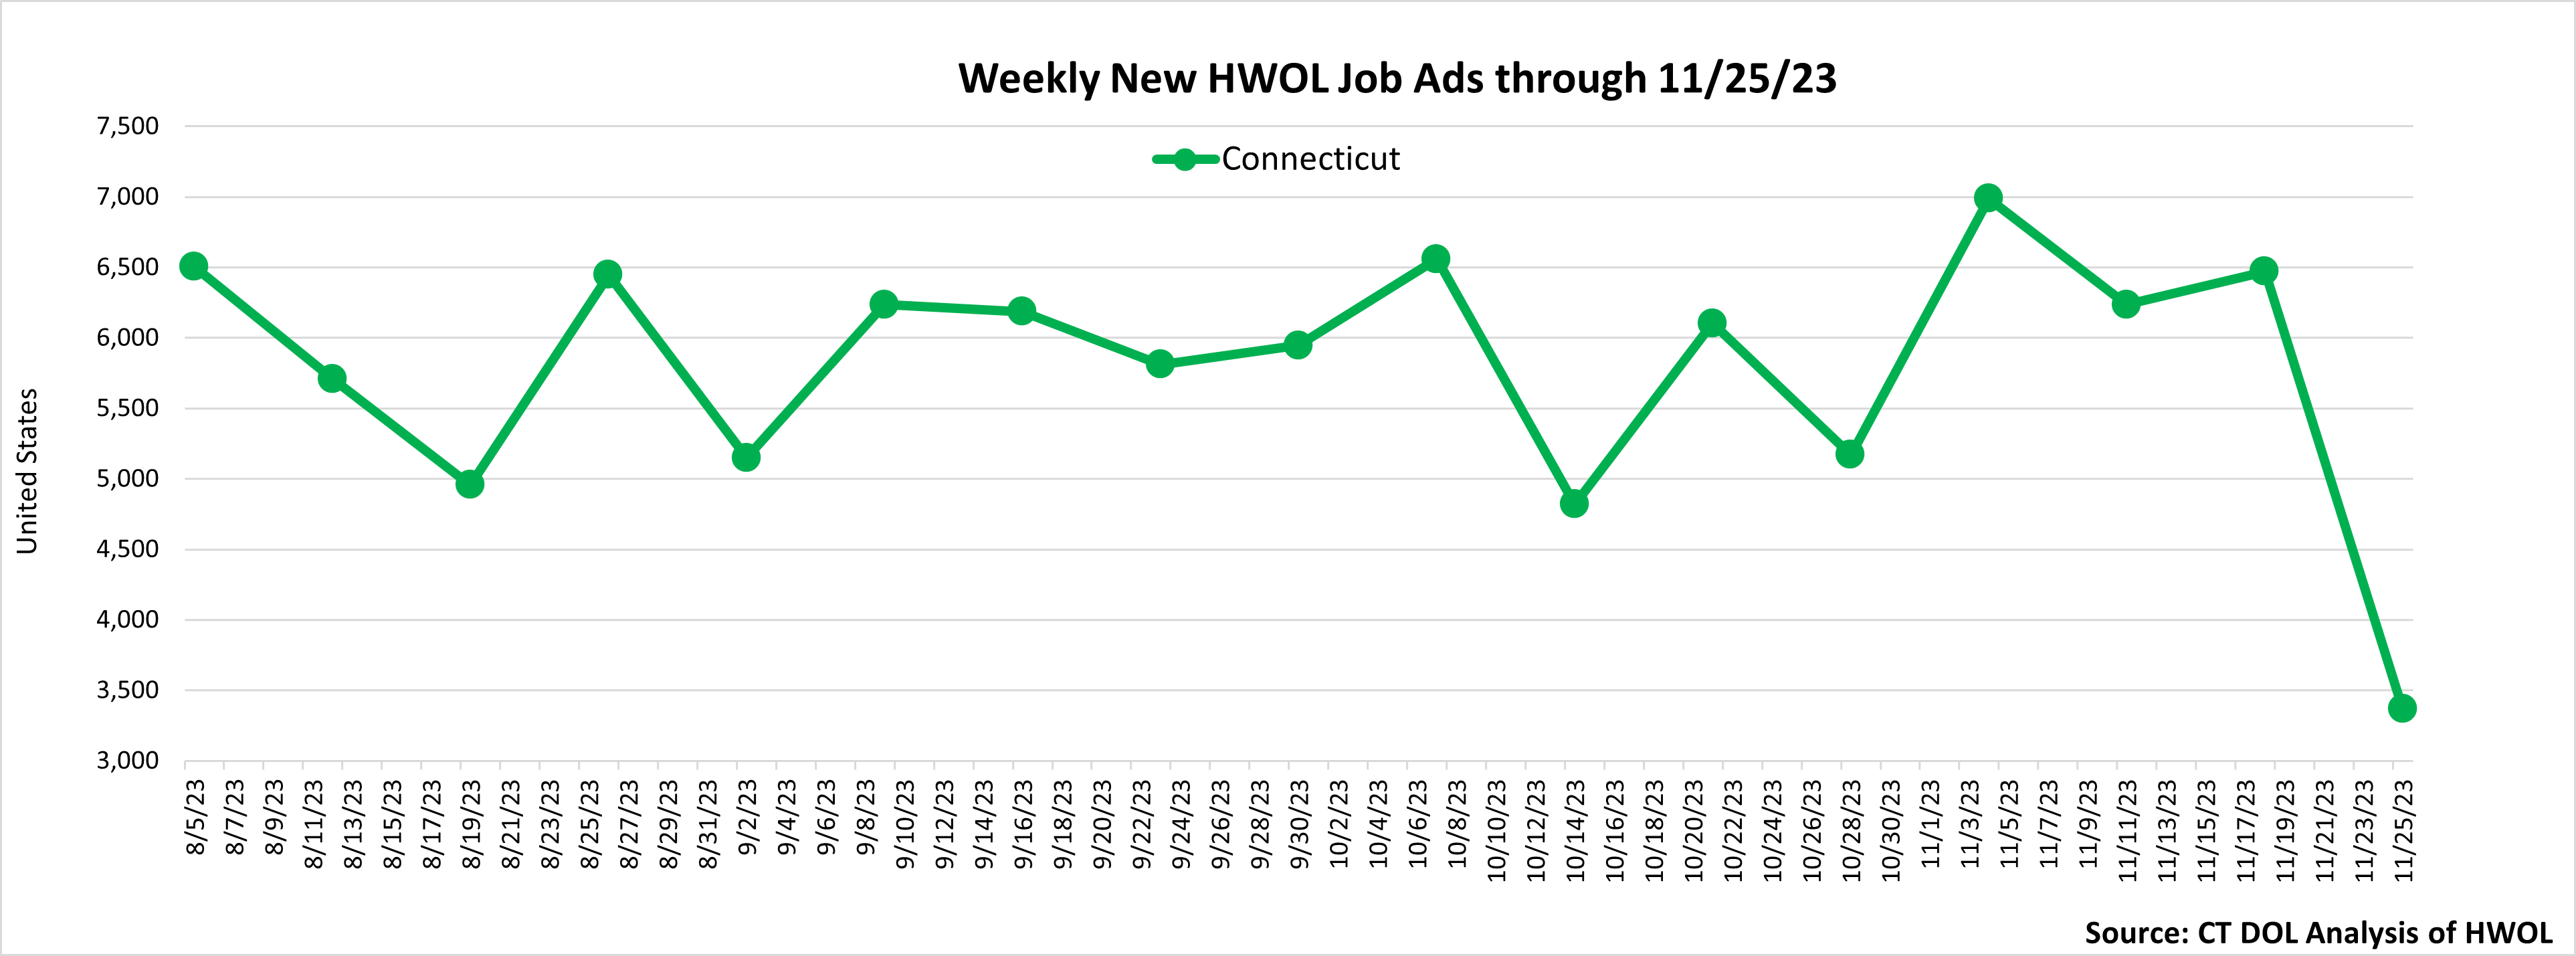 Connecticut Weekly Statewide New HWOL Job Ads through 11/25/23